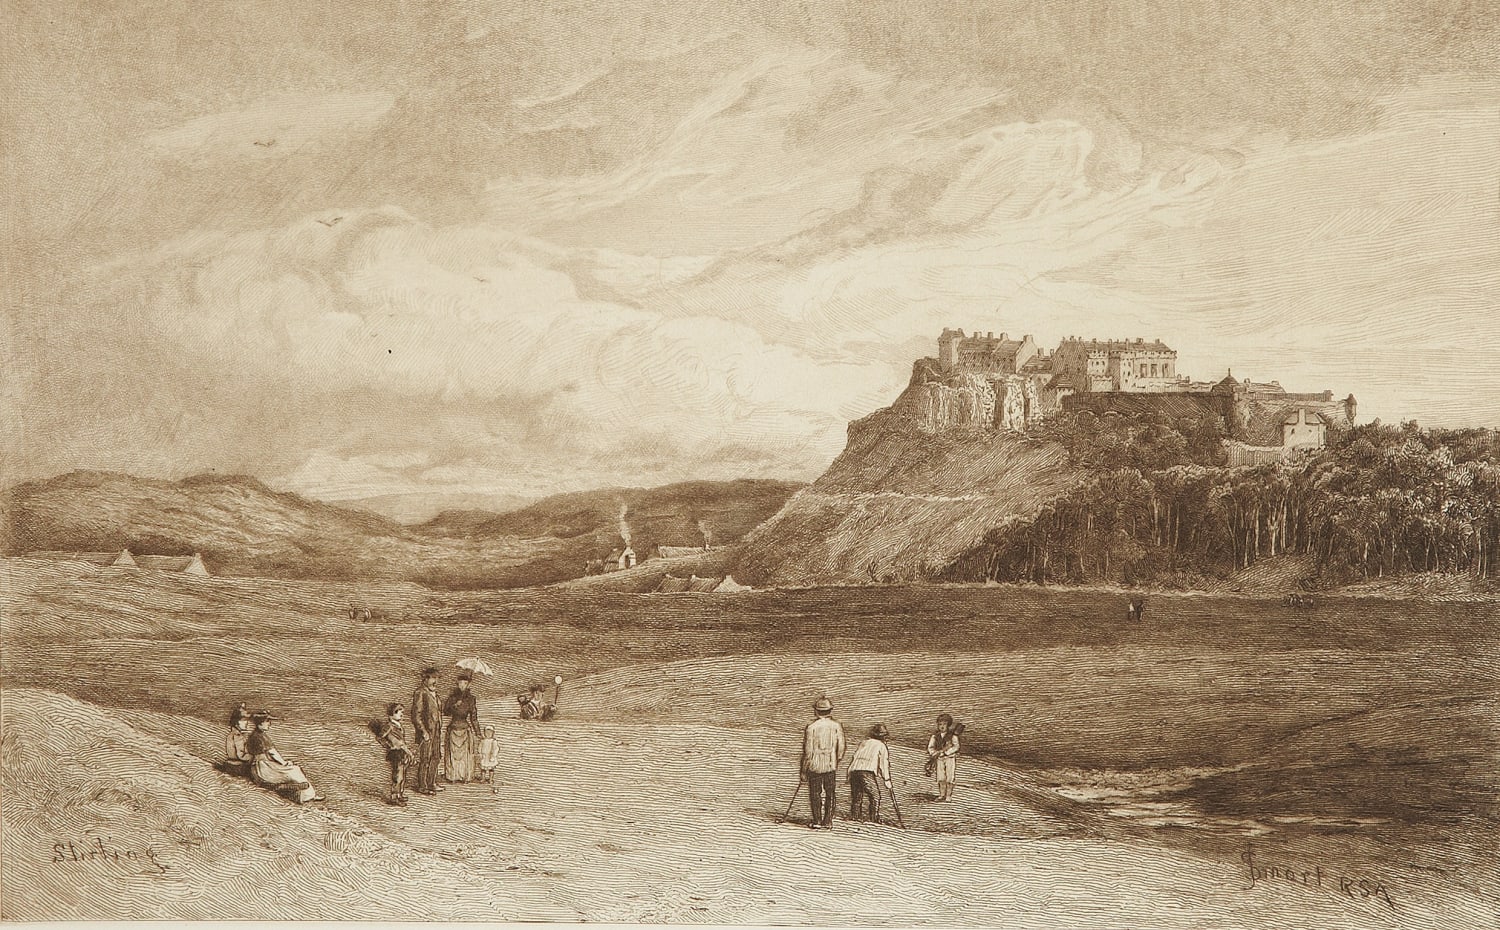 George Aikman ARSA ( 1831-1905) (after John Smart), The Golf Greens of Scotland Series: Stirling  Etching, 1893, 42.3 x 58.4cm  Gifted by John Smart RSA (1893) 1991.311.1